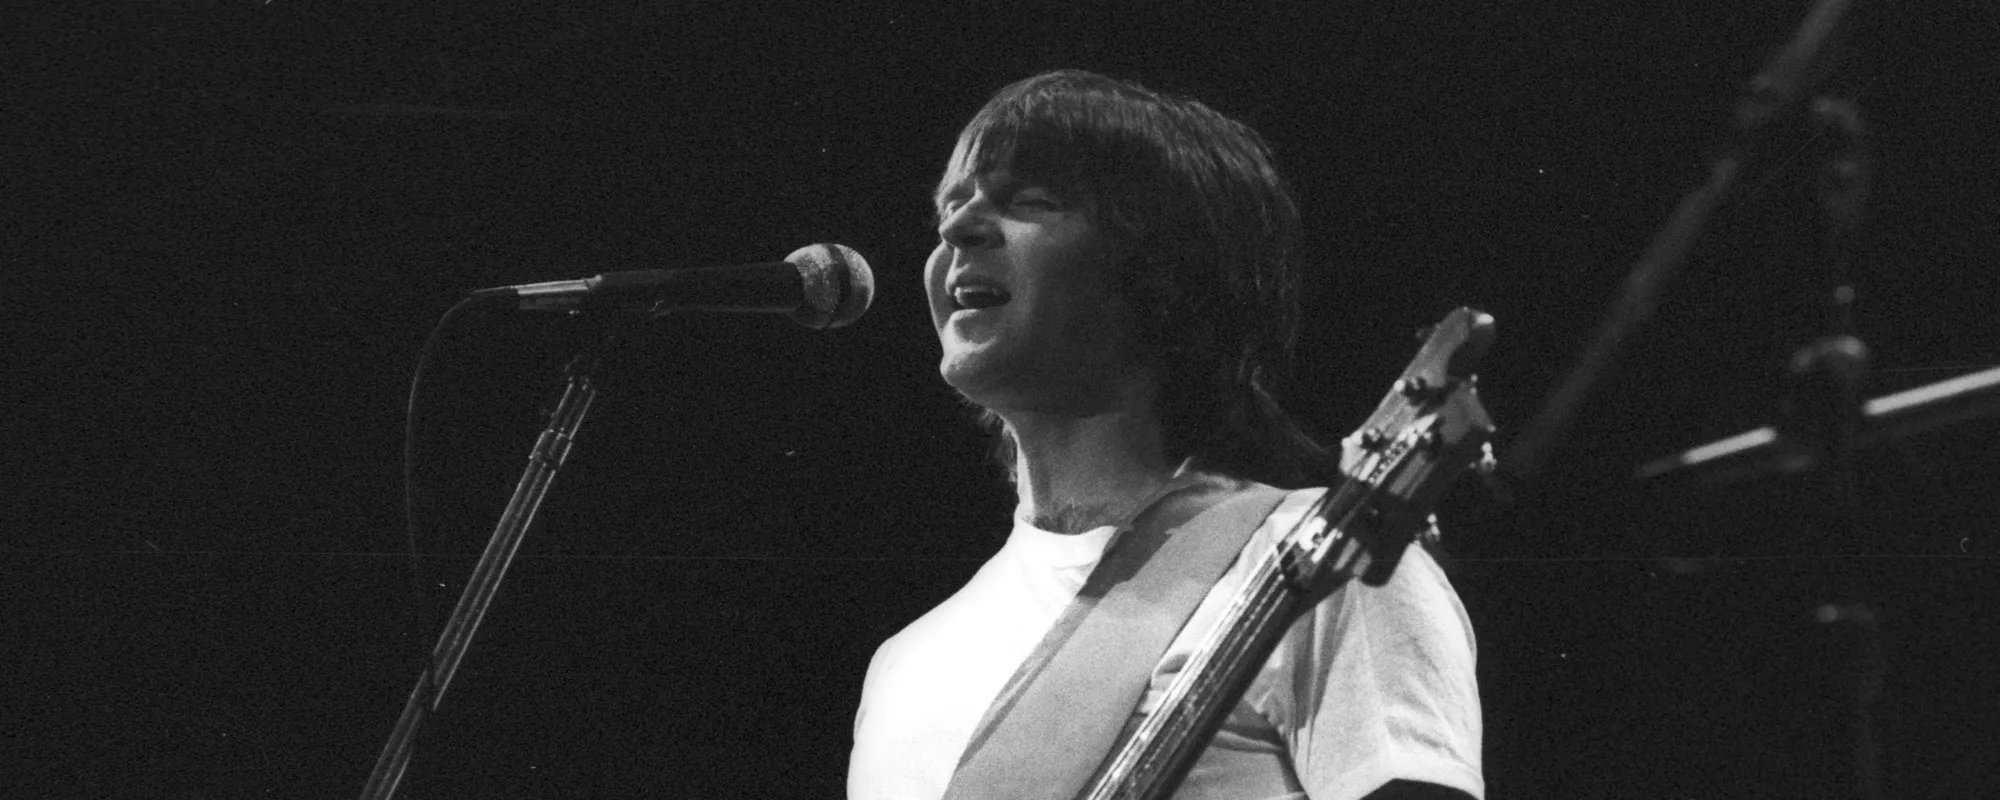 6 Songs Randy Meisner Wrote for the Eagles